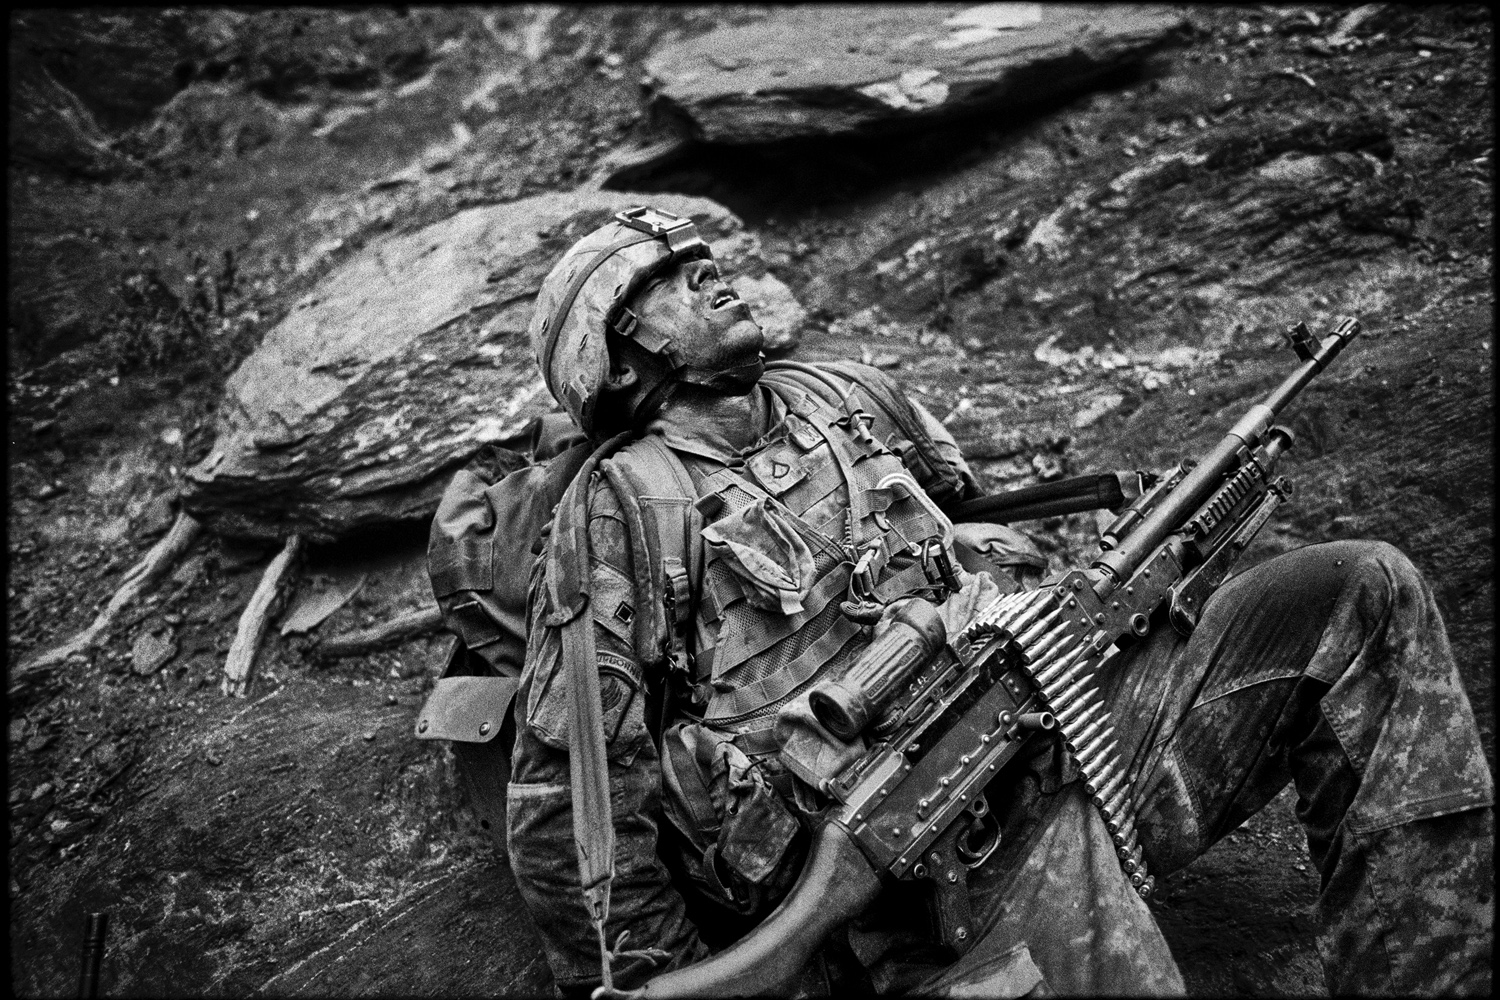 US Army Specialist Sterling Jones collapses in exhaustion during Operation Rock Avalanche in the Korengal Valley, Afghanistan. 2007.